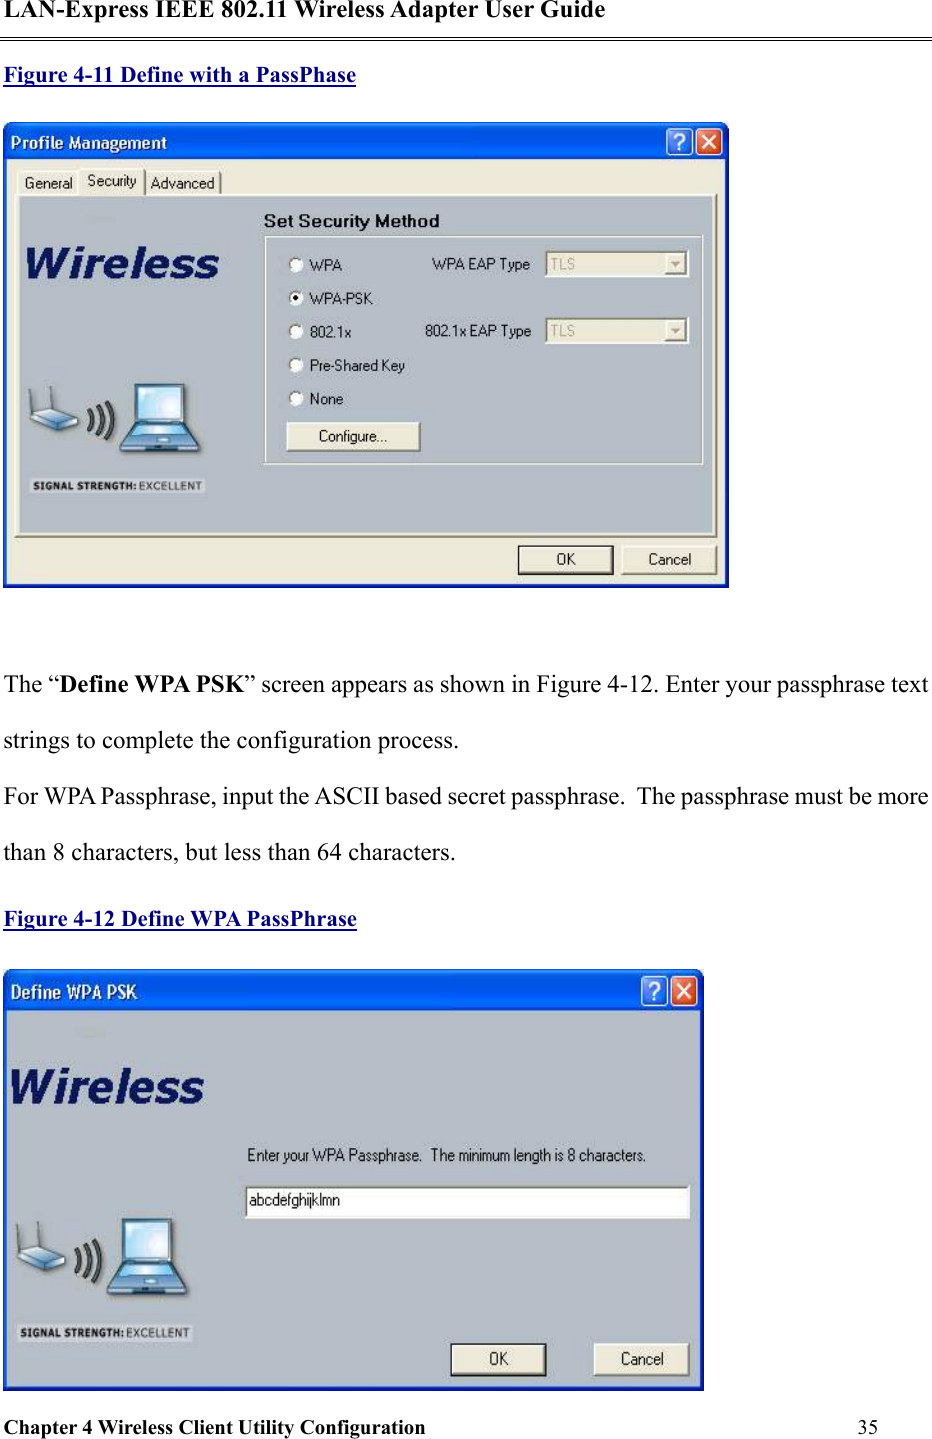 LAN-Express IEEE 802.11 Wireless Adapter User Guide Chapter 4 Wireless Client Utility Configuration   35  Figure 4-11 Define with a PassPhase   The “Define WPA PSK” screen appears as shown in Figure 4-12. Enter your passphrase text strings to complete the configuration process.  For WPA Passphrase, input the ASCII based secret passphrase.  The passphrase must be more than 8 characters, but less than 64 characters. Figure 4-12 Define WPA PassPhrase  